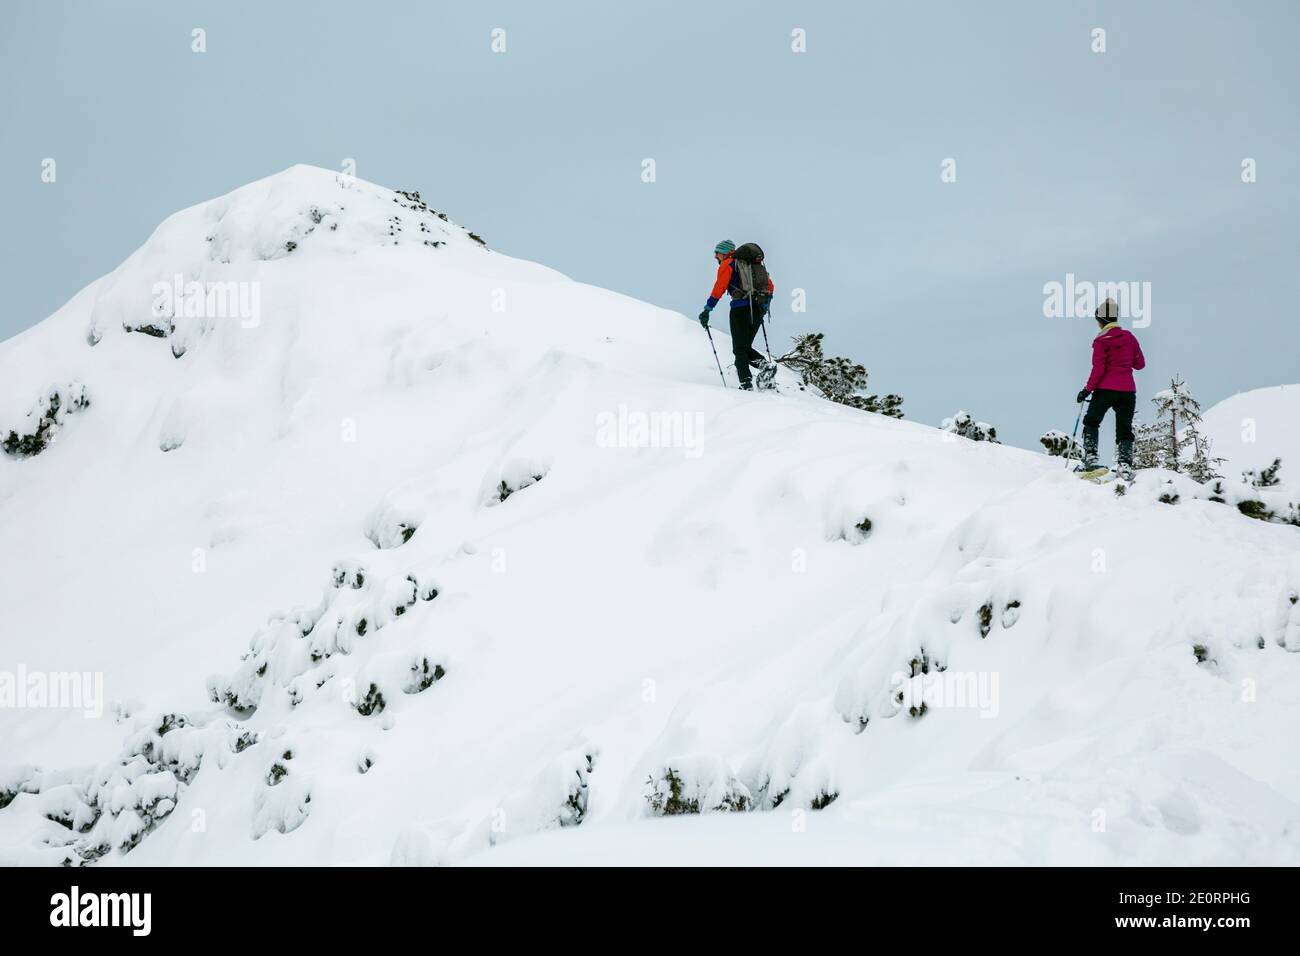 Two hikers alpinists climbing up the snowy mountain on Sunset. Alpine winter view. Carpathians, Marmarosy Stock Photo